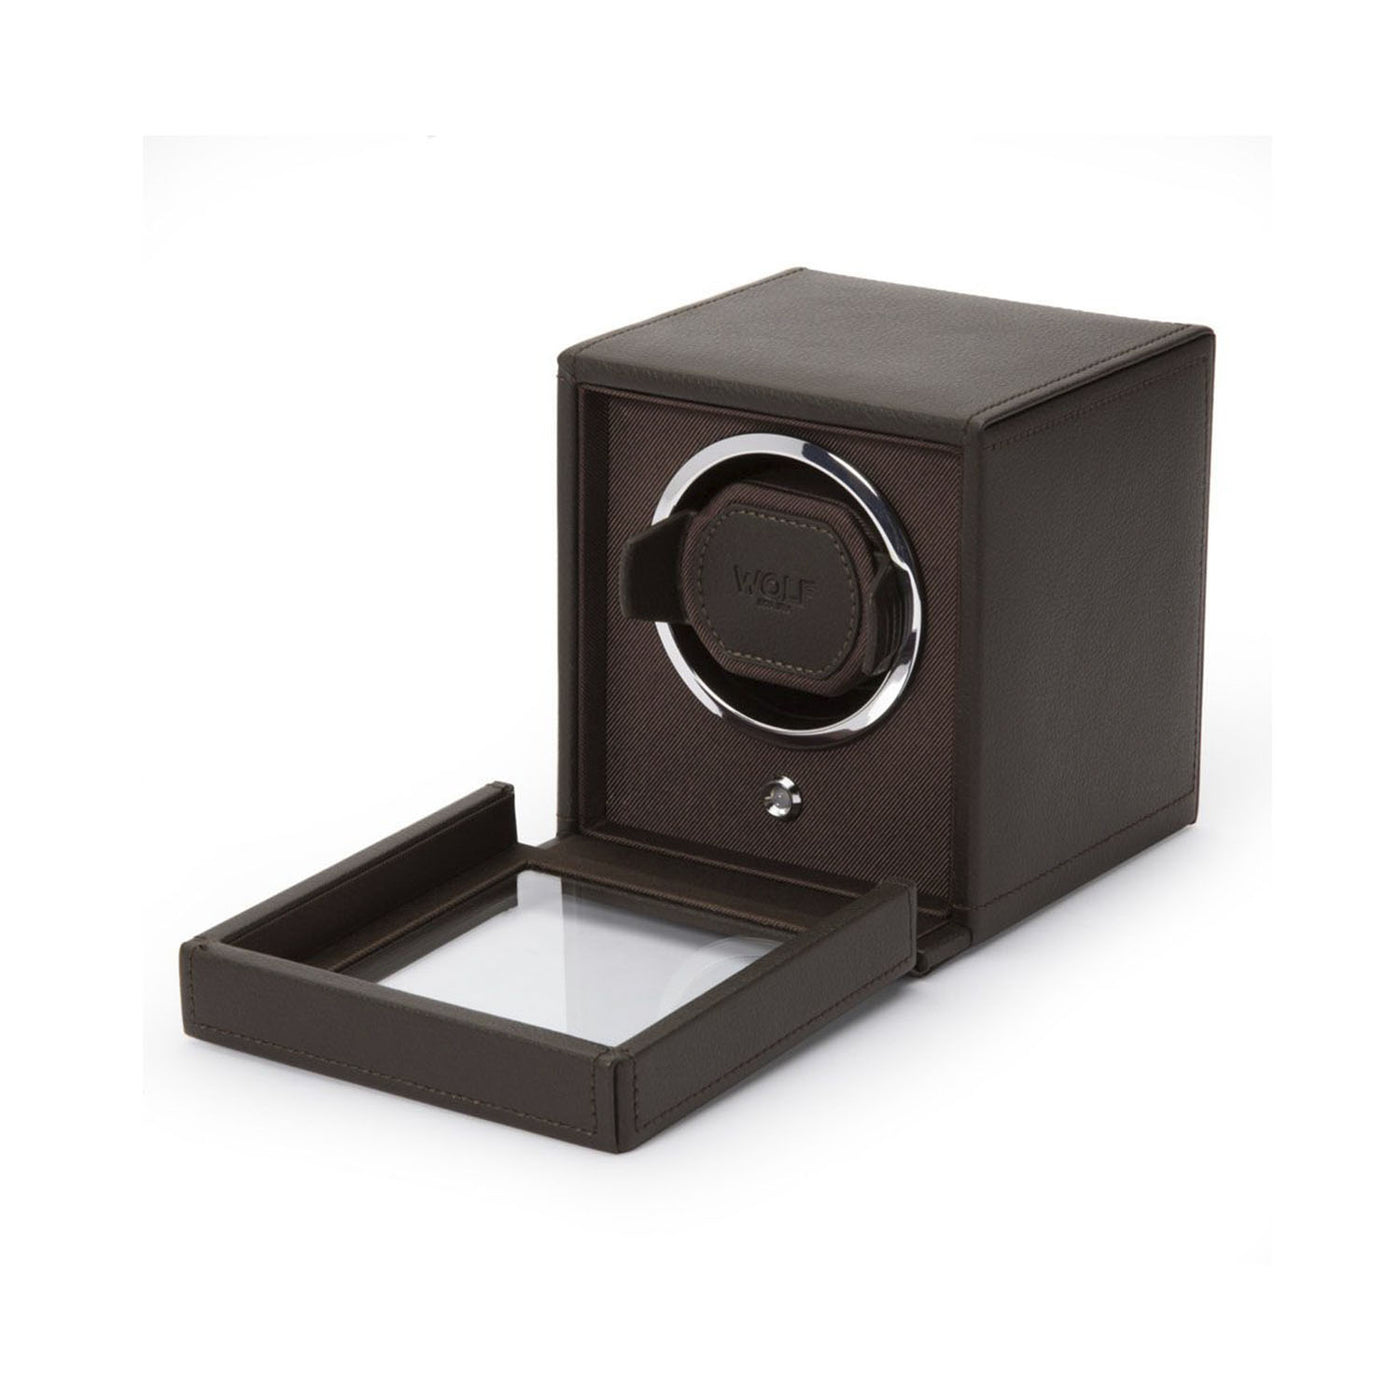 Wolf 1834 Cub Single Watch Winder With Cover – 461106